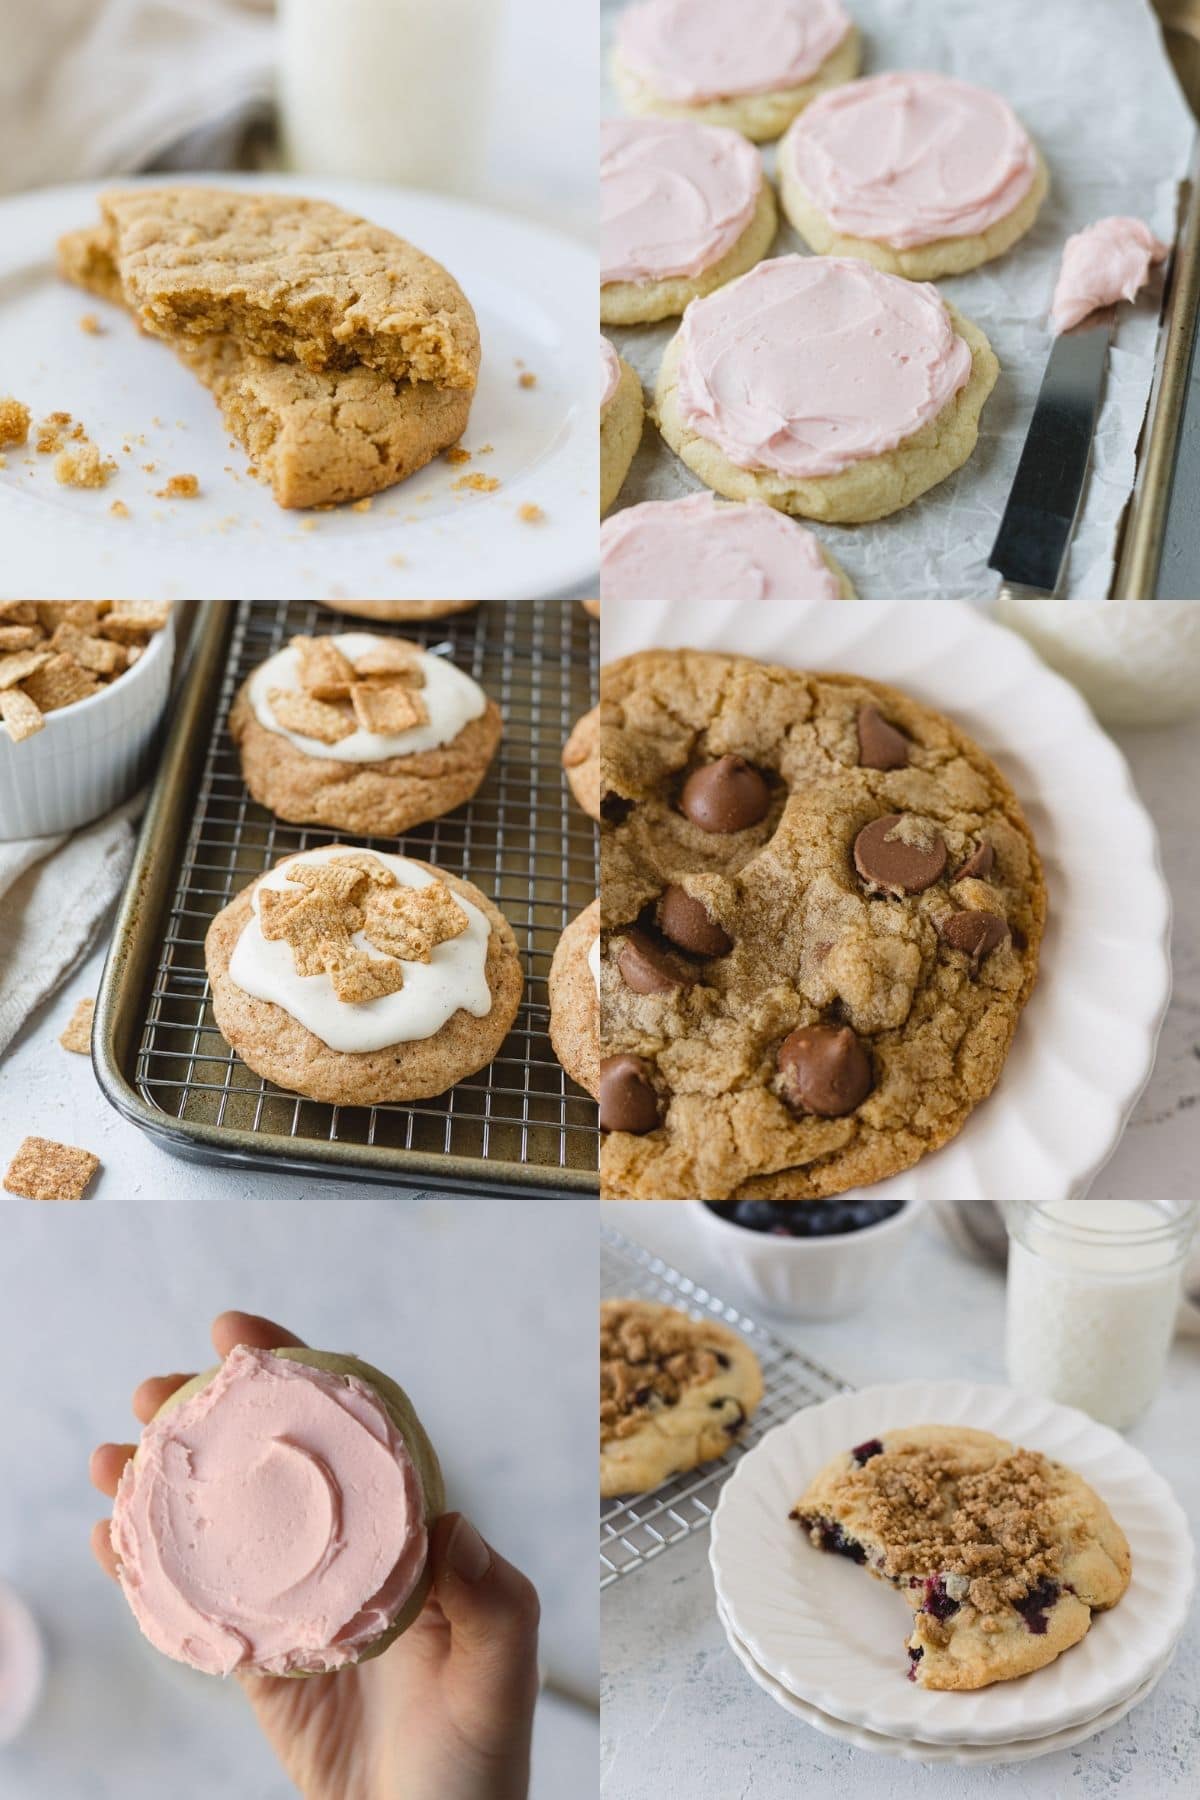 Crumbl Cookie Recipes To Bake at Home!